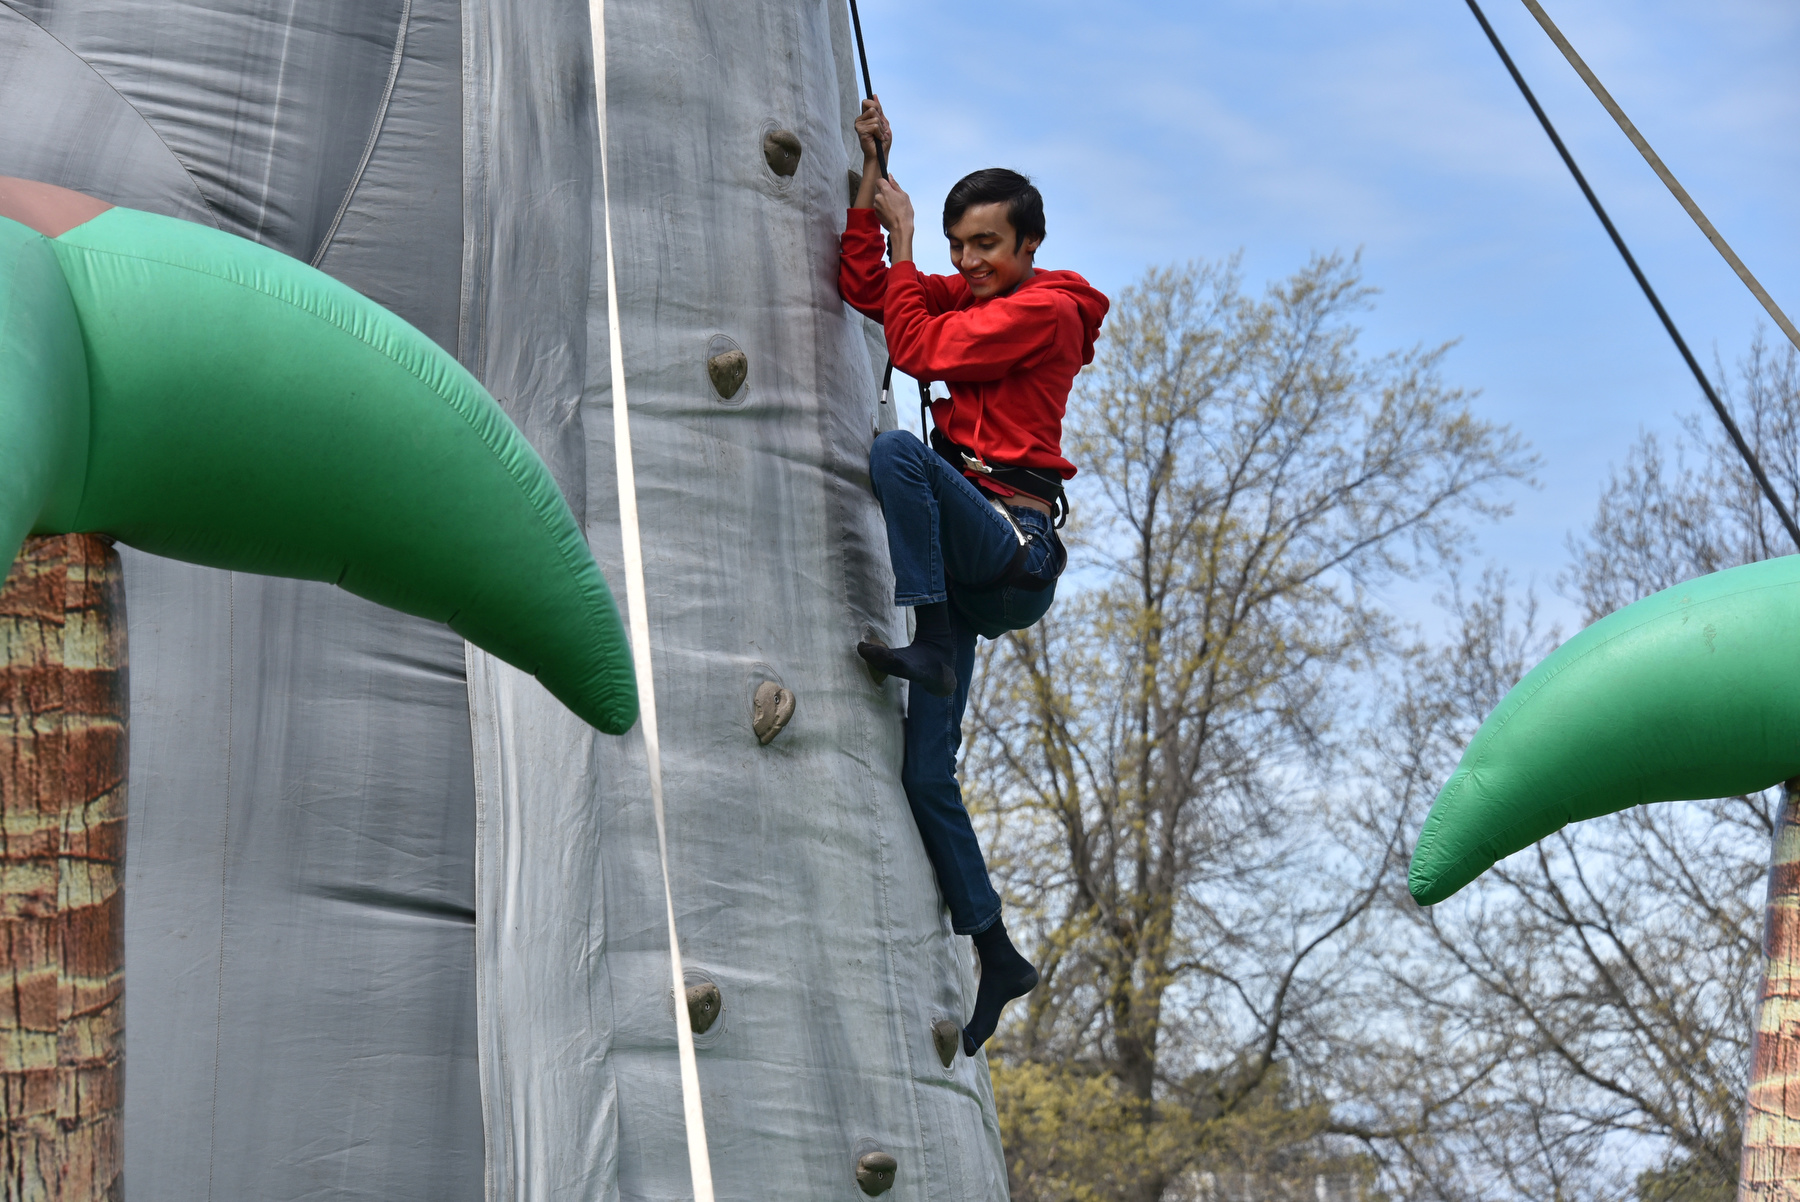 During the May 5 OzFest, Saurav Lamichhane, a freshman computer science major, enjoys the heights of the rock climbing wall.